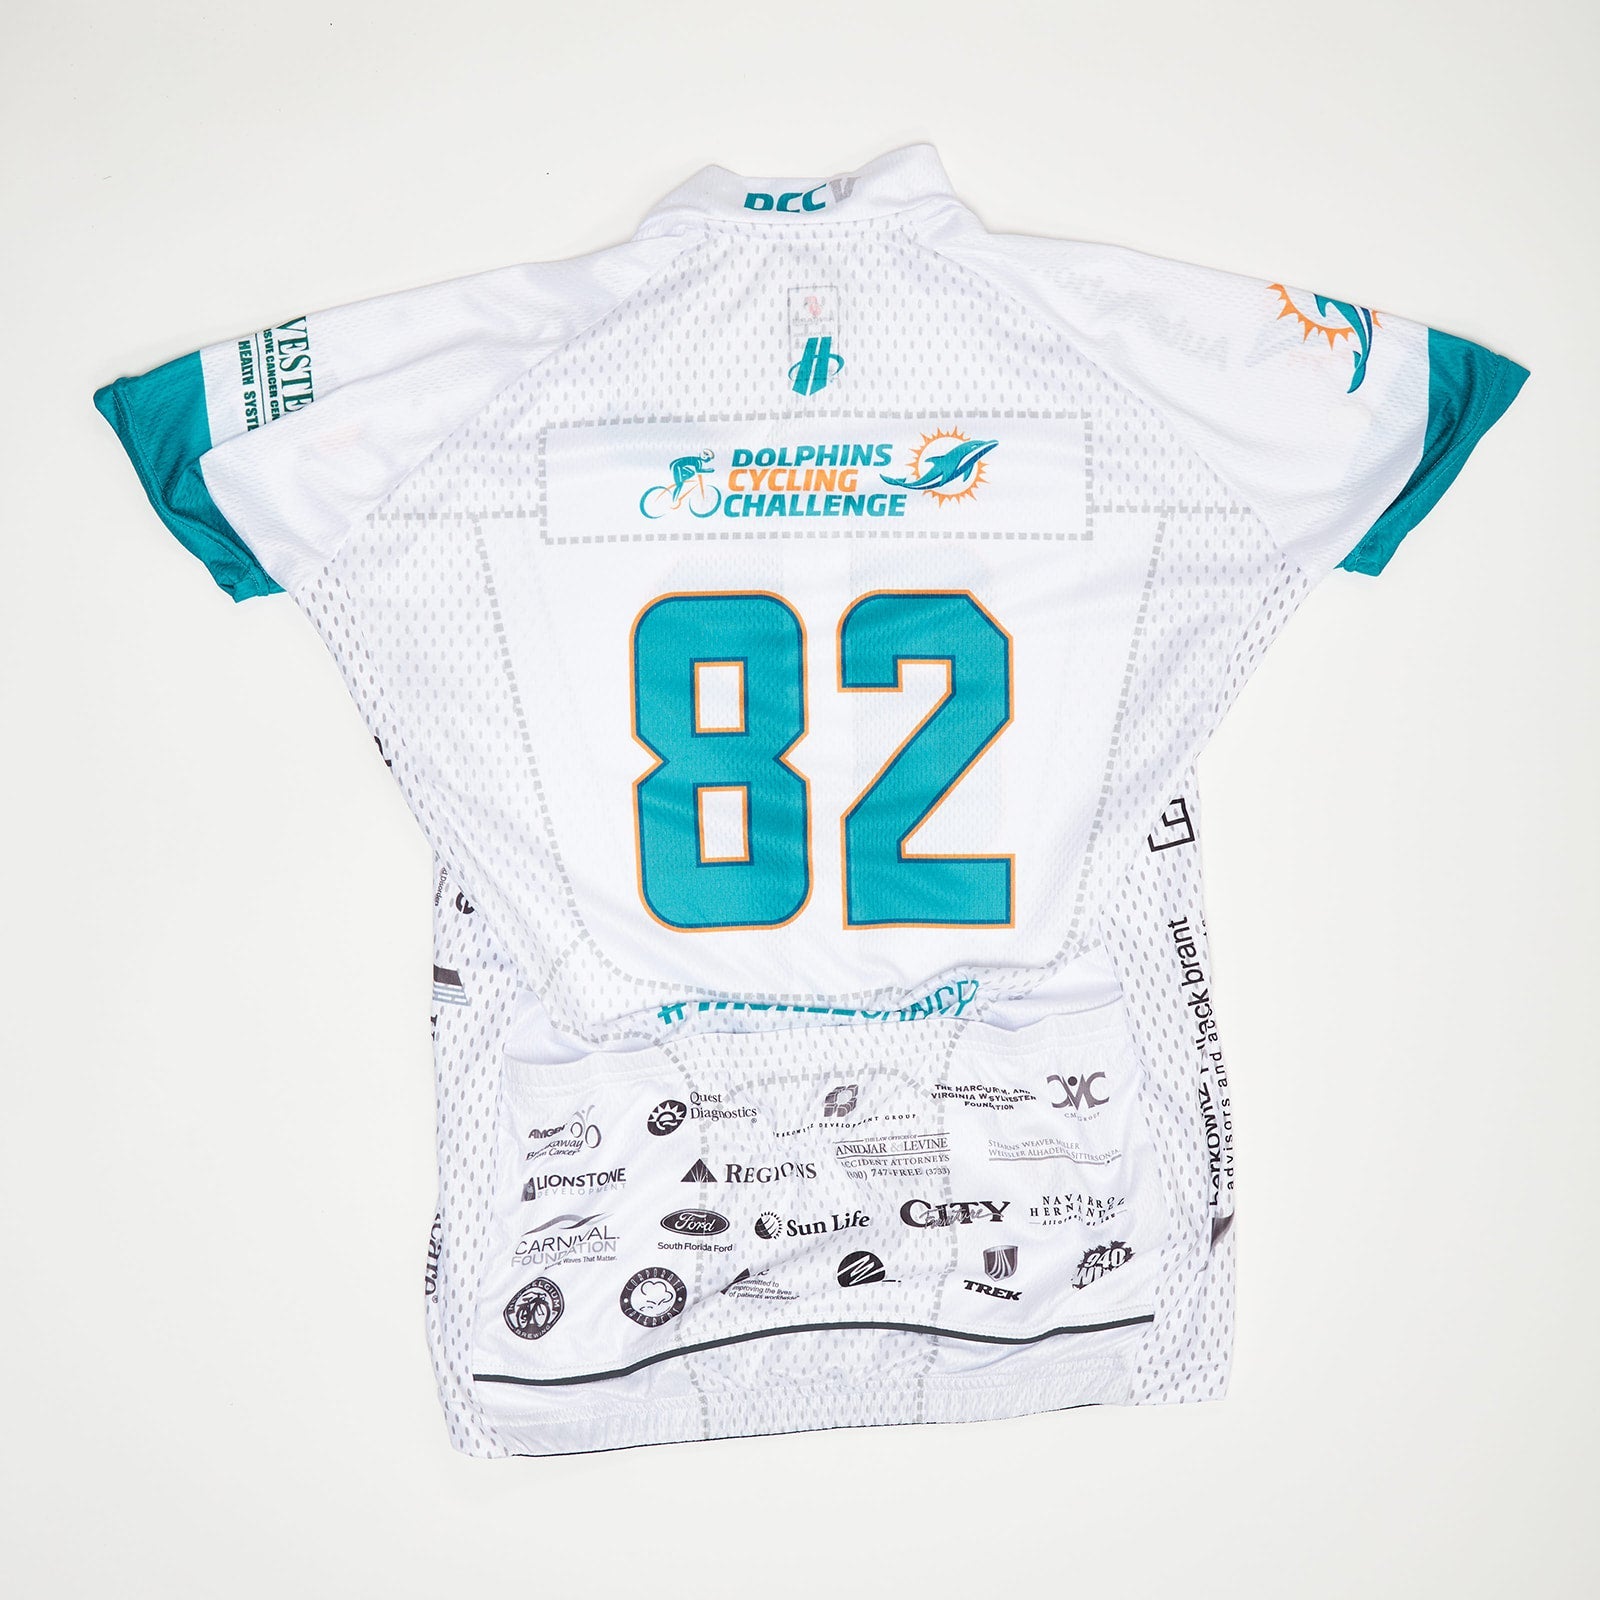 DCC V 2015 Women's Dolphins Cancer Challenge Cycling Jersey